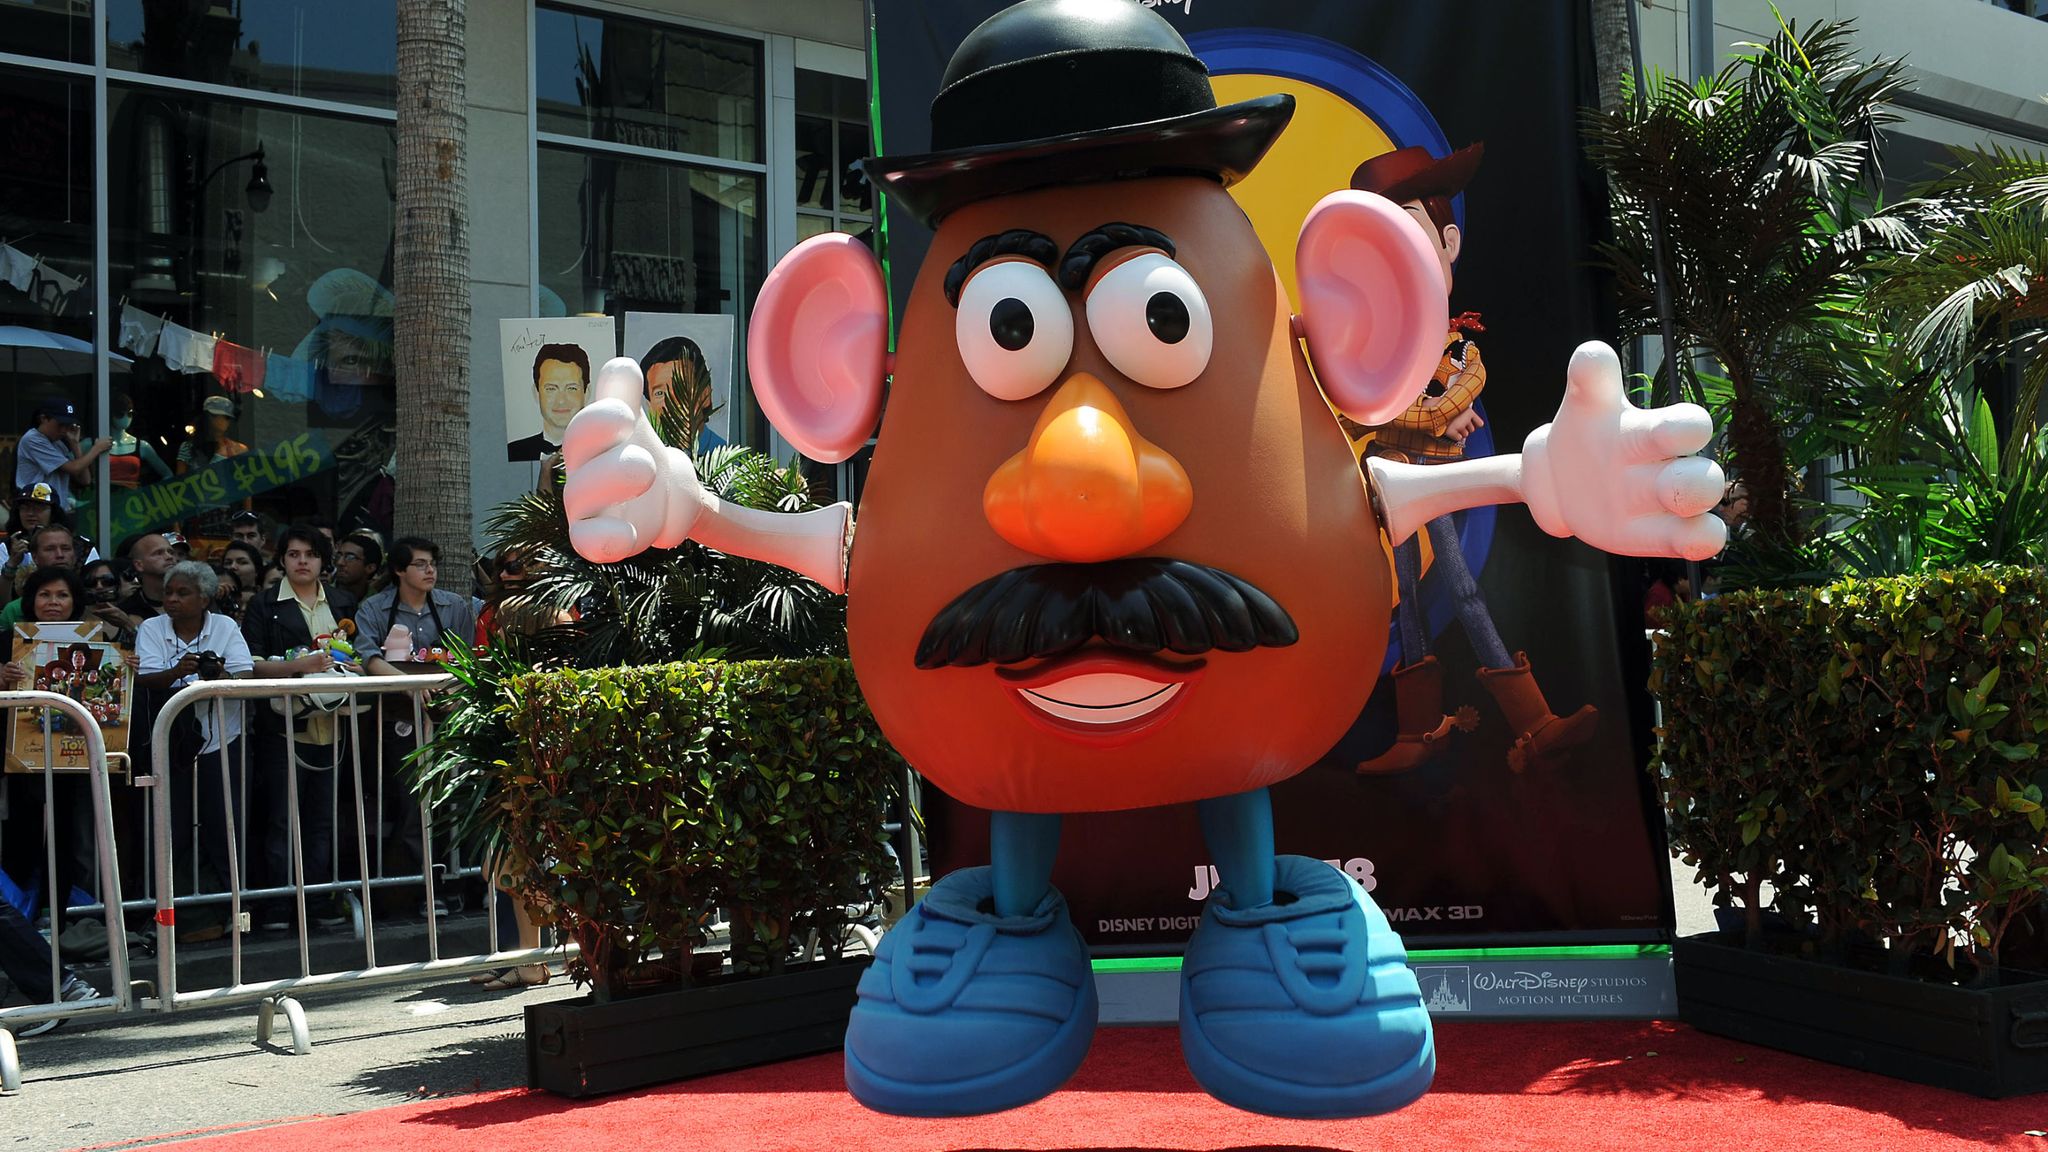 Mr Potato Head is no more as classic toy goes gender neutral. Ents & Arts News